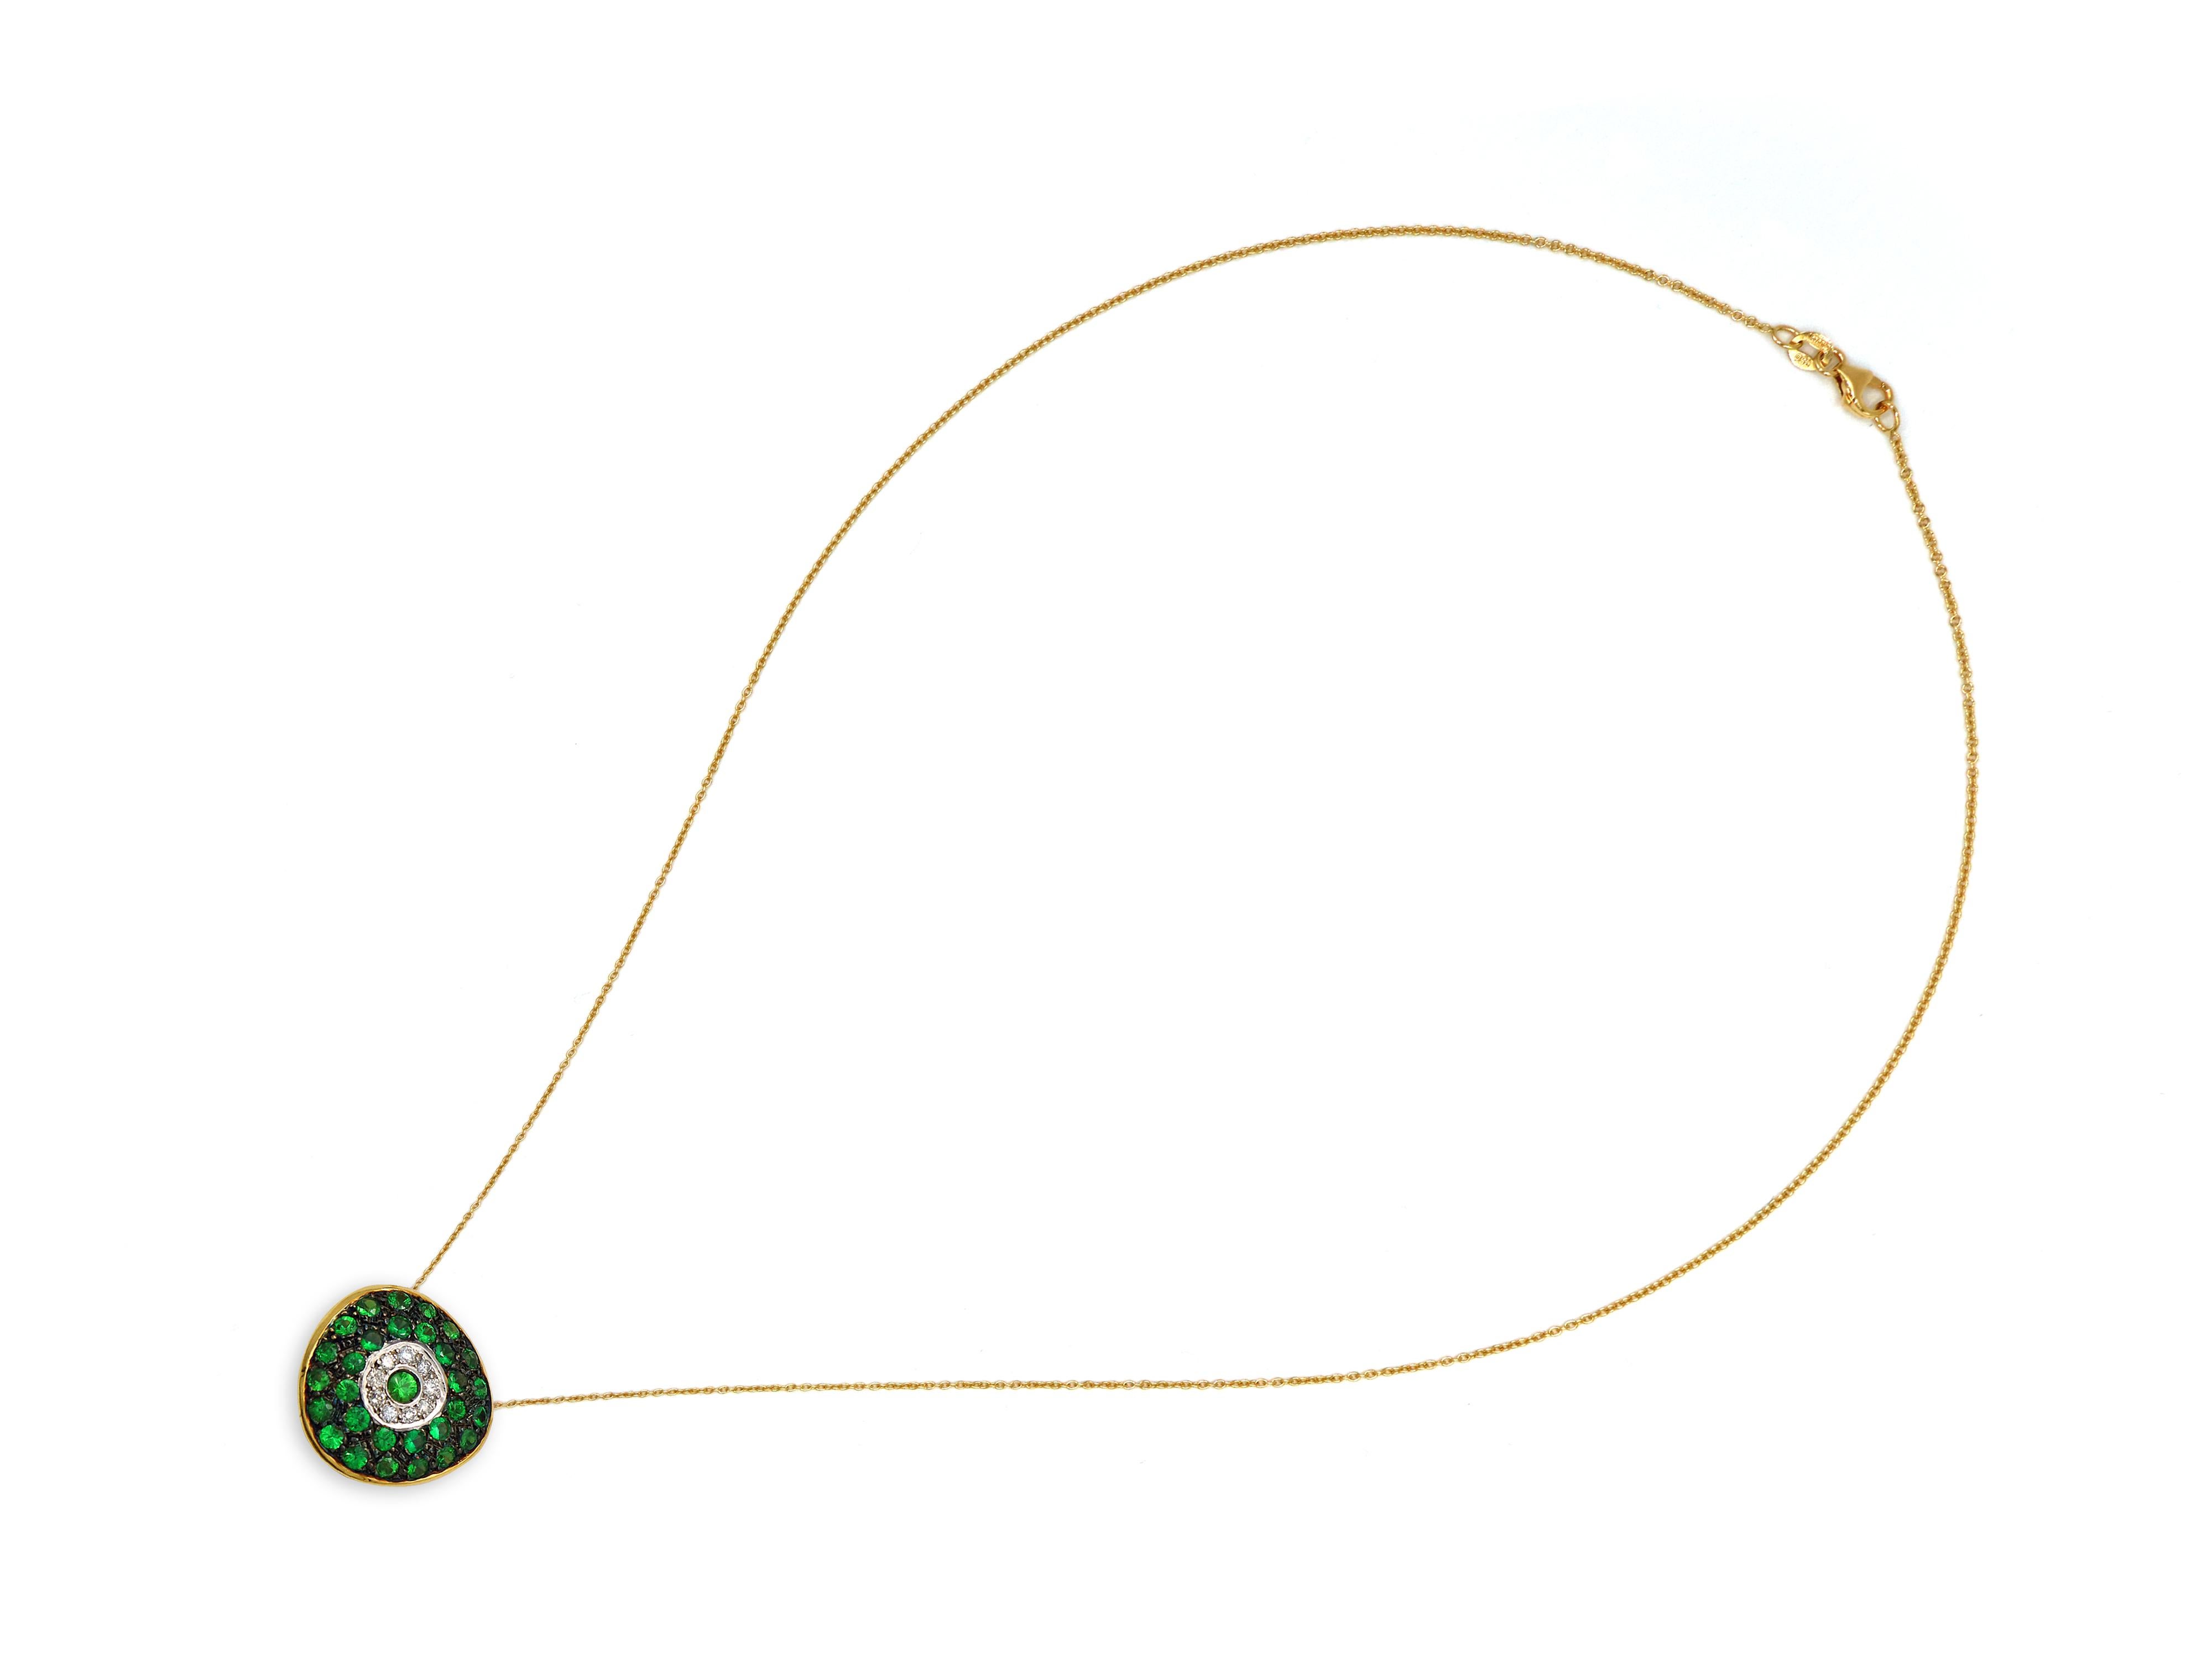 Abstract evil eye in 18 karat yellow gold set with 1.30 carats Tsavorites and 0.10 brilliant cut Diamonds.  A larger size evil eye in an off round shape that hosts the chain behind the stones and creates a very minimal and smooth necklace. Most eyes